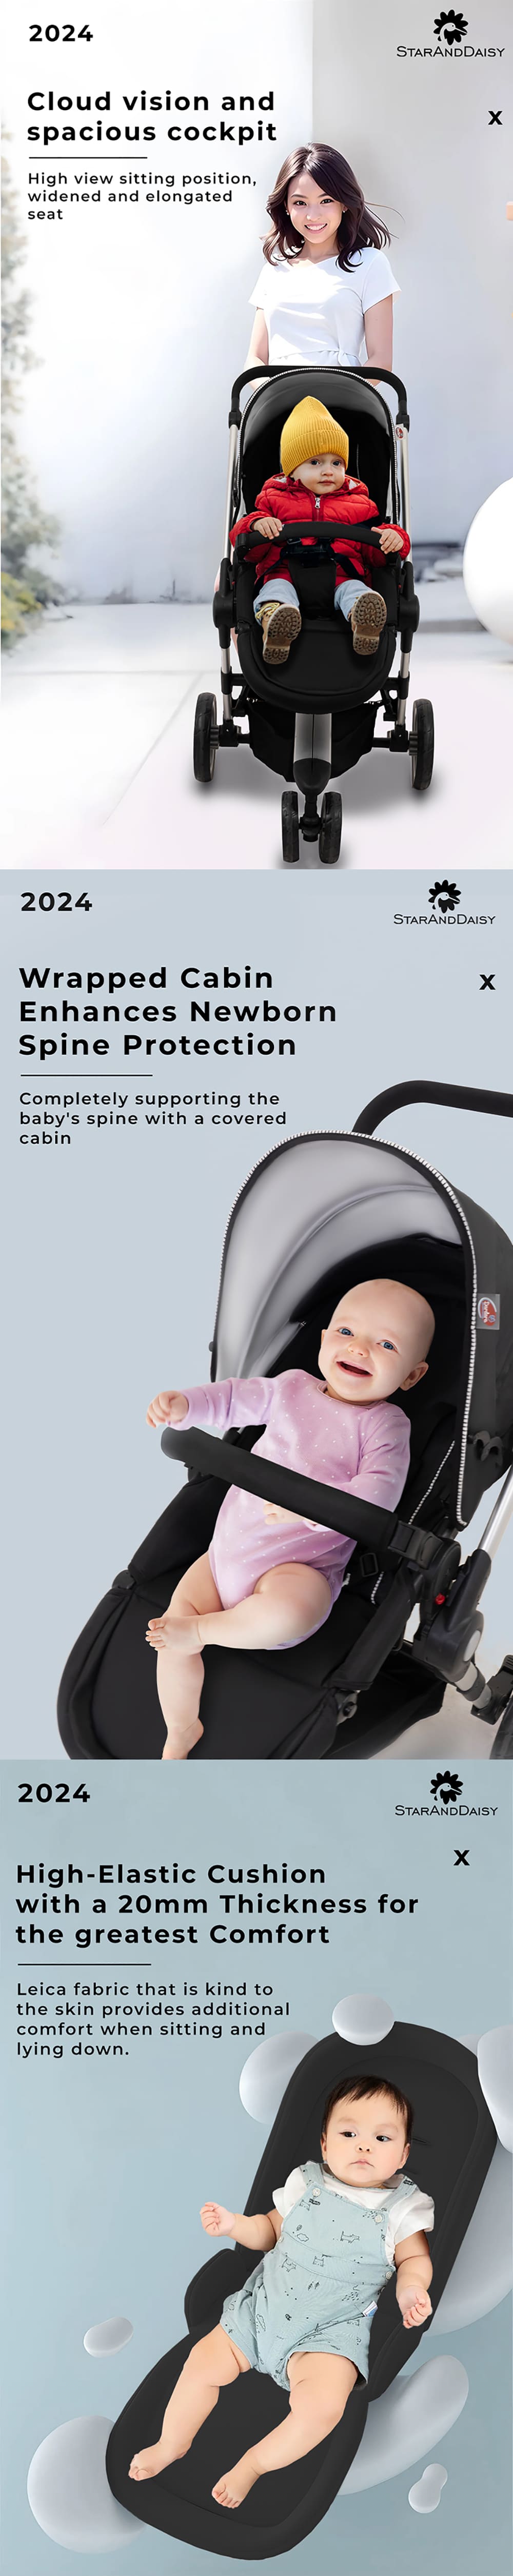 Infant Stroller with High View Sitting